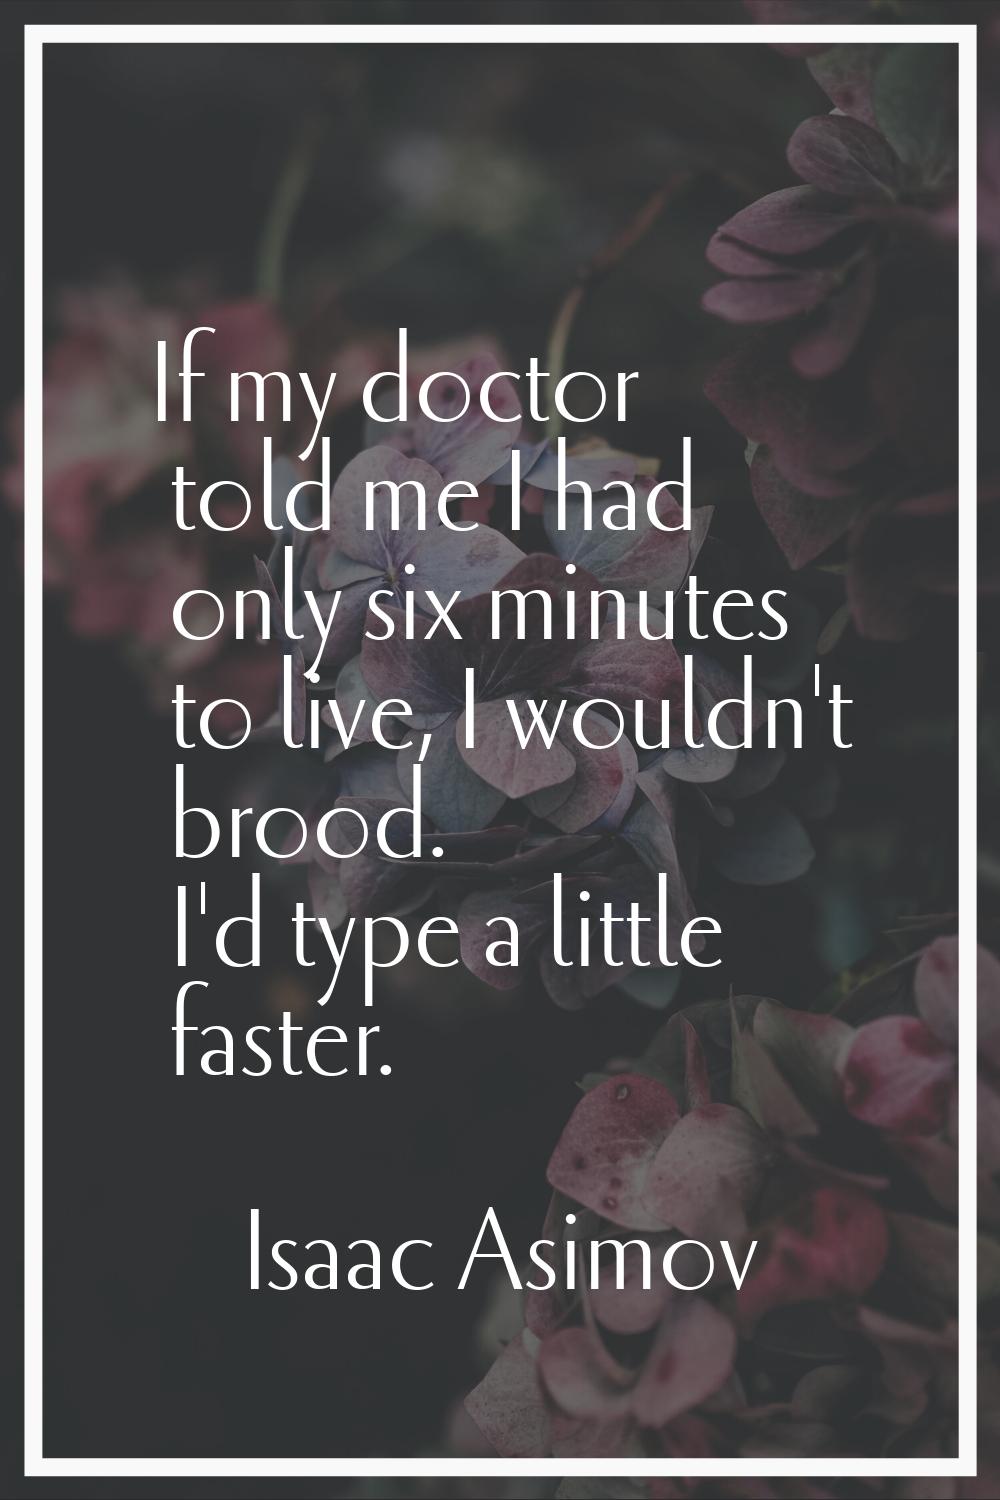 If my doctor told me I had only six minutes to live, I wouldn't brood. I'd type a little faster.